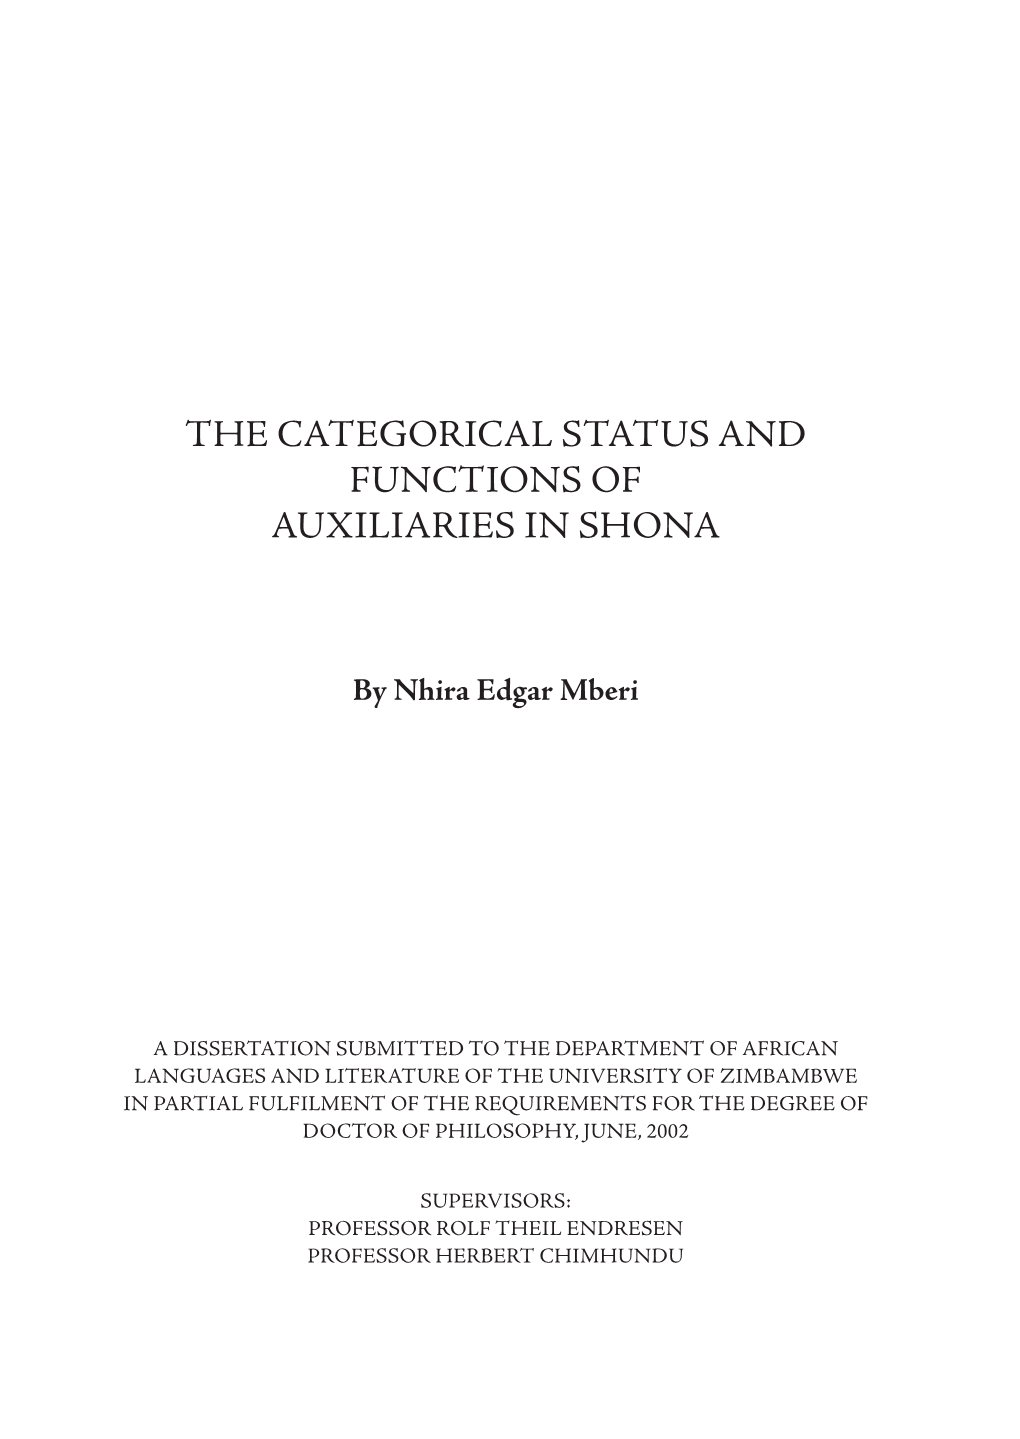 The Categorical Status and Functions of Auxiliaries in Shona